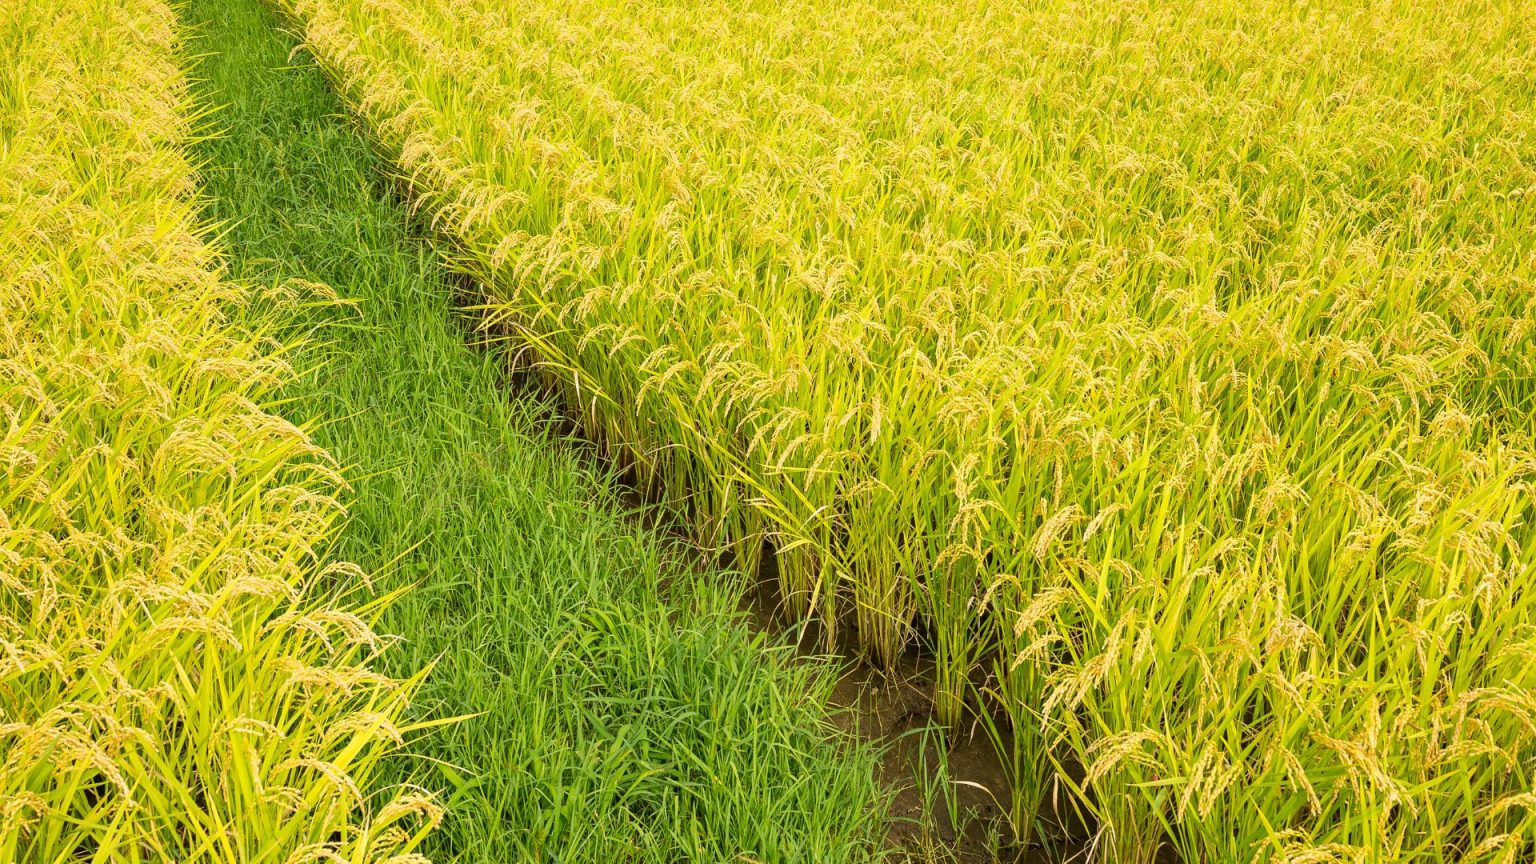 ClimateSmart Agriculture Solutions in Rice Wikifarmer